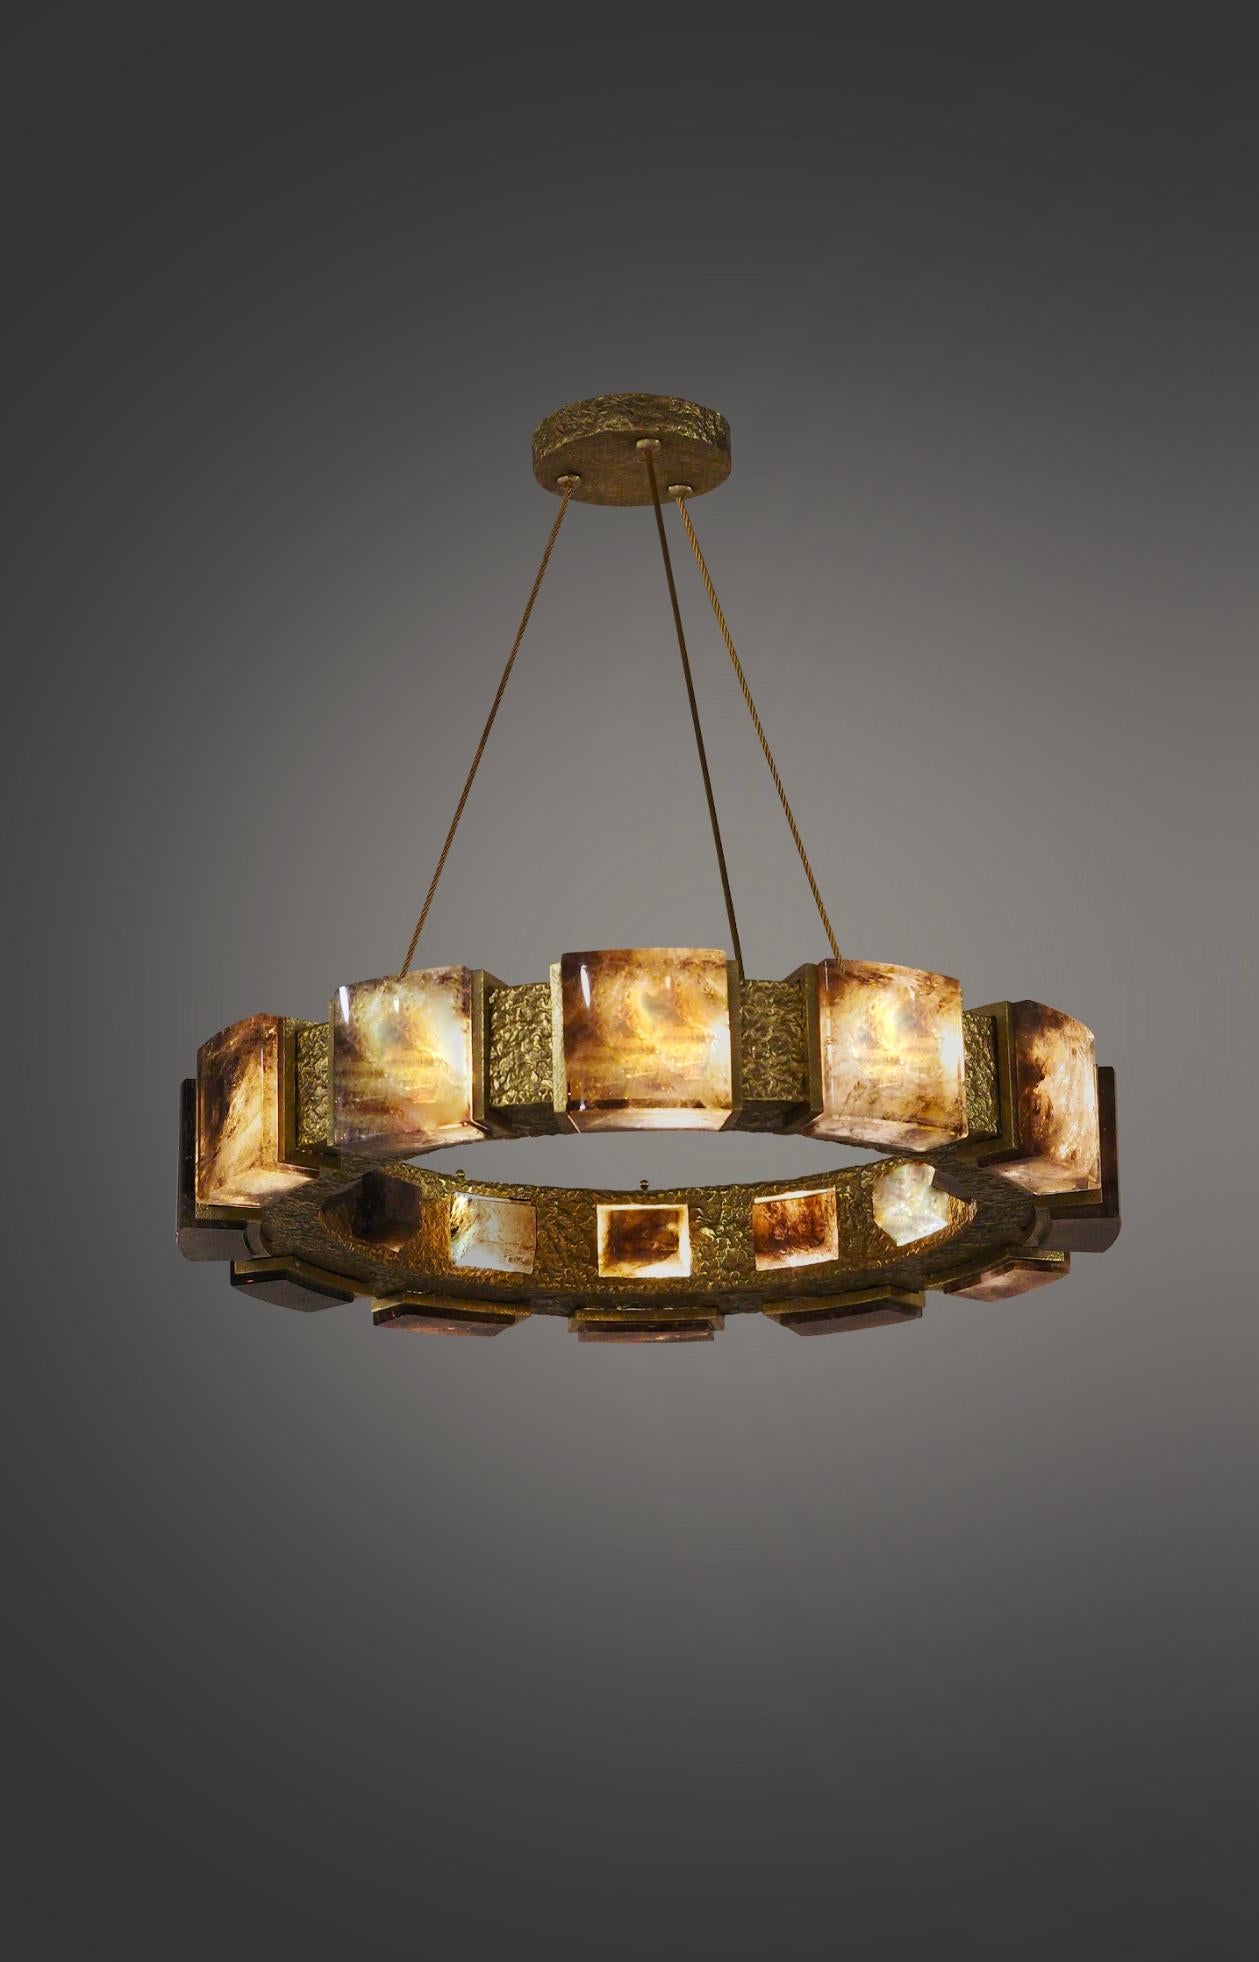 Pair of Smoky rock crystal chandeliers with hammered brass detail. Created by Phoenix Gallery, NYC.
12 sockets installed. Use 12 of G9 lightbulbs. 60watts each, total 720w max.